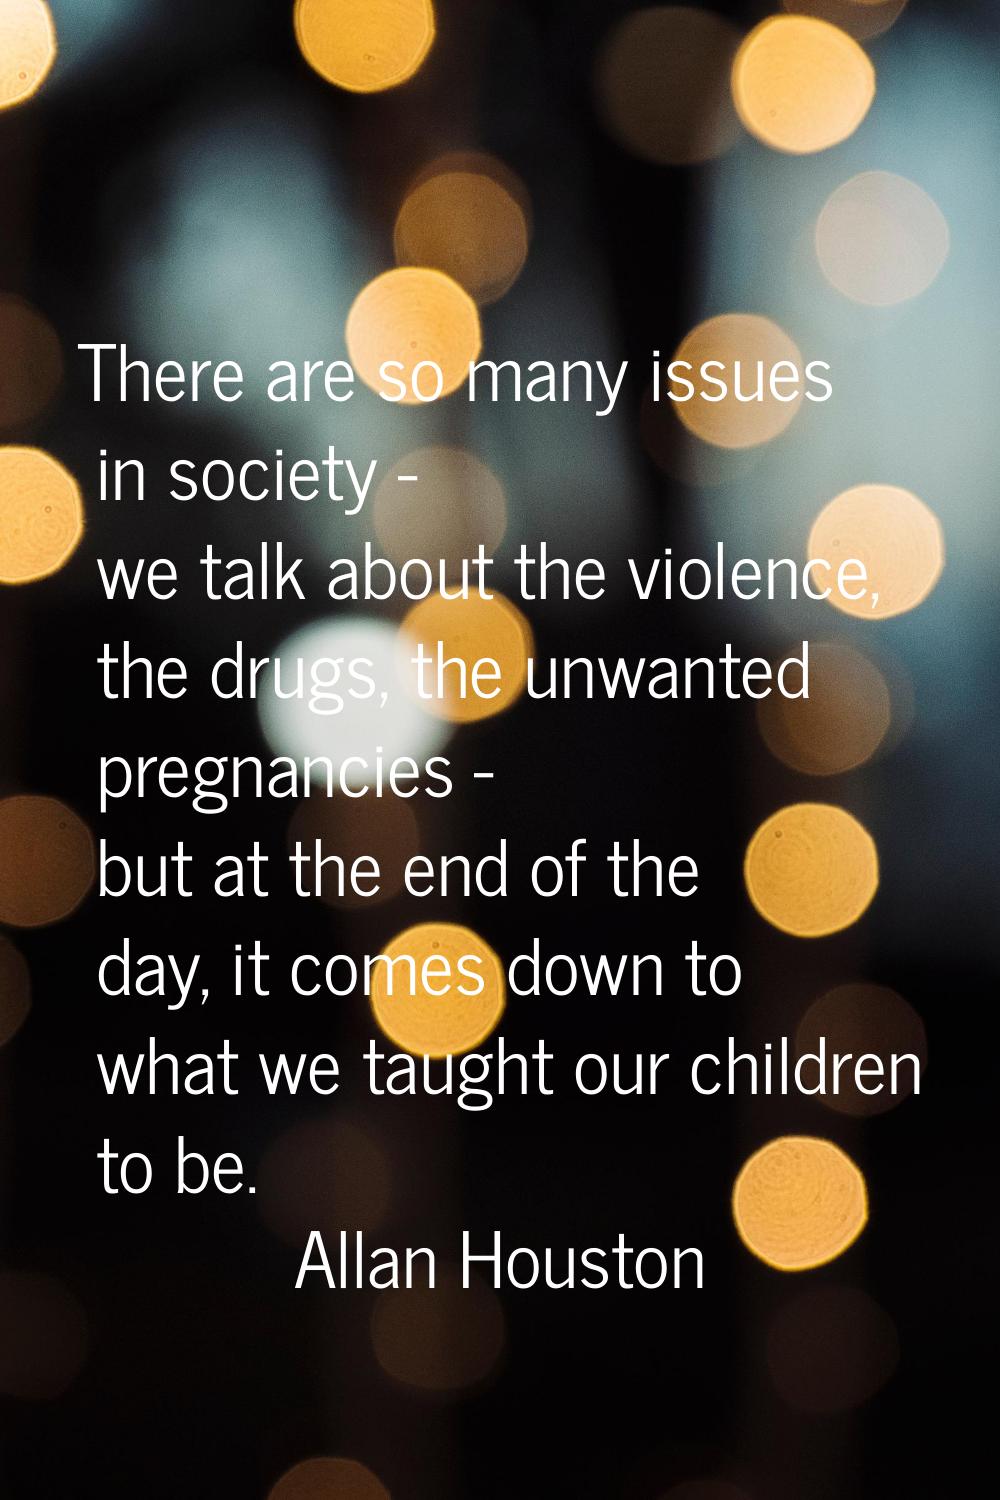 There are so many issues in society - we talk about the violence, the drugs, the unwanted pregnanci